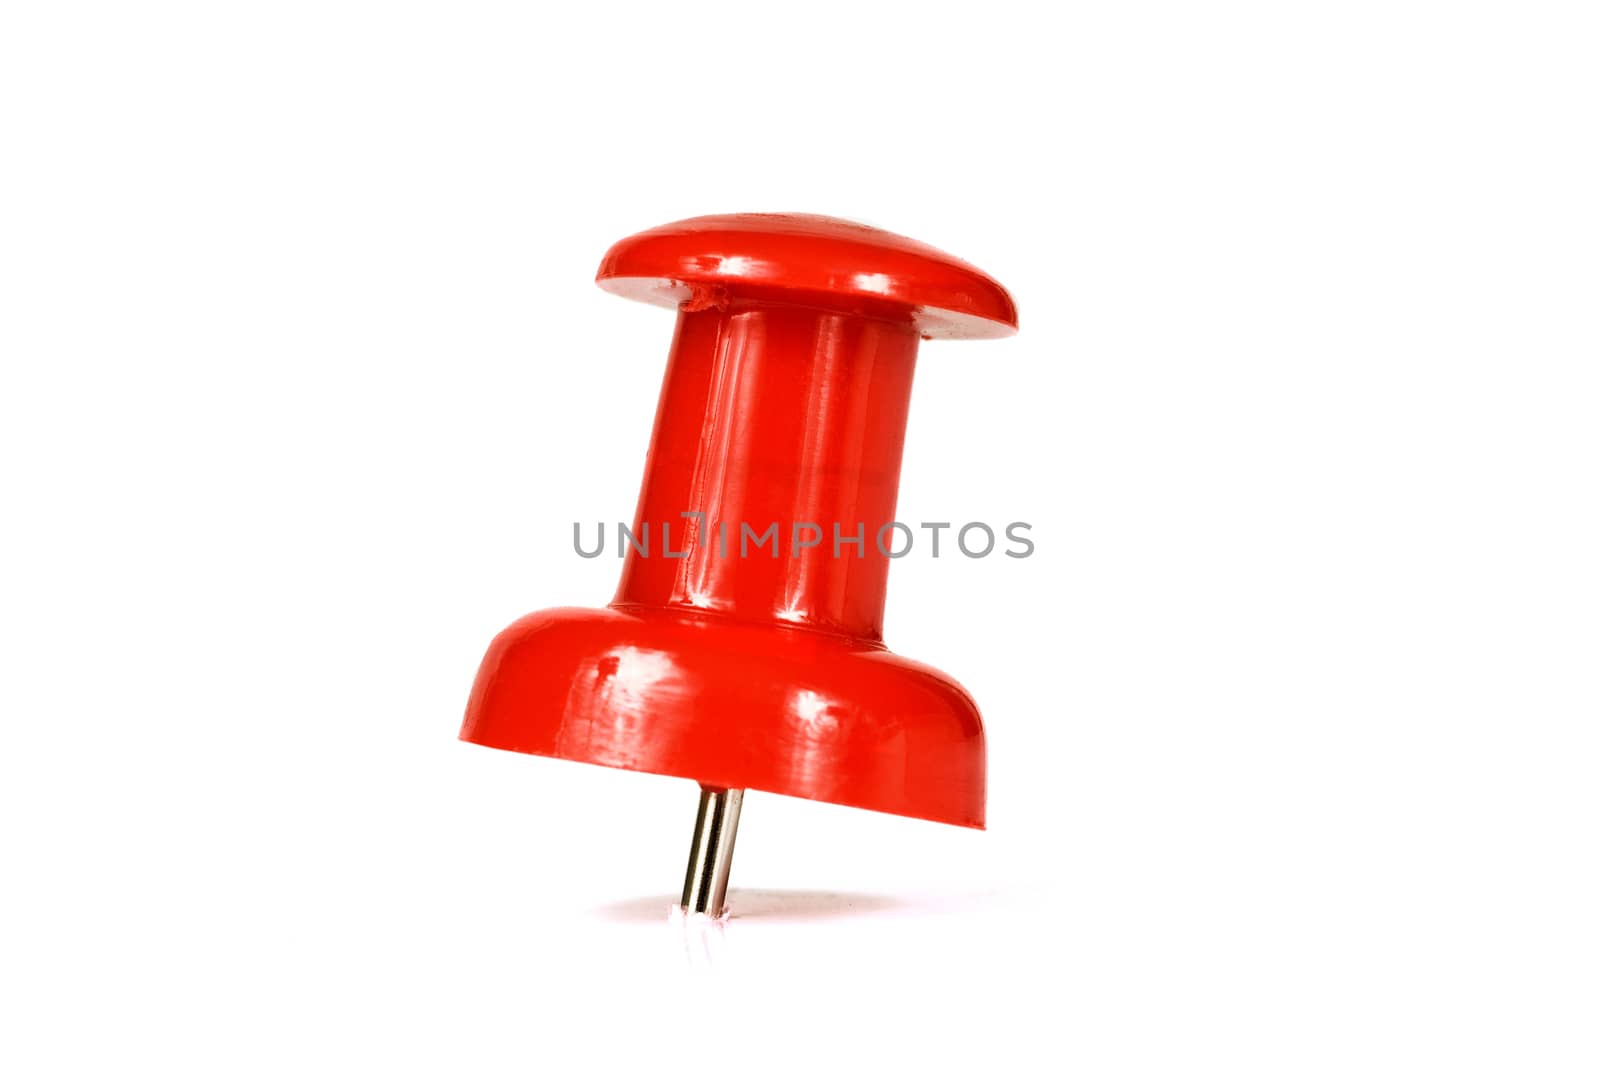 Macro shot of a red pushpin isolated on a white background